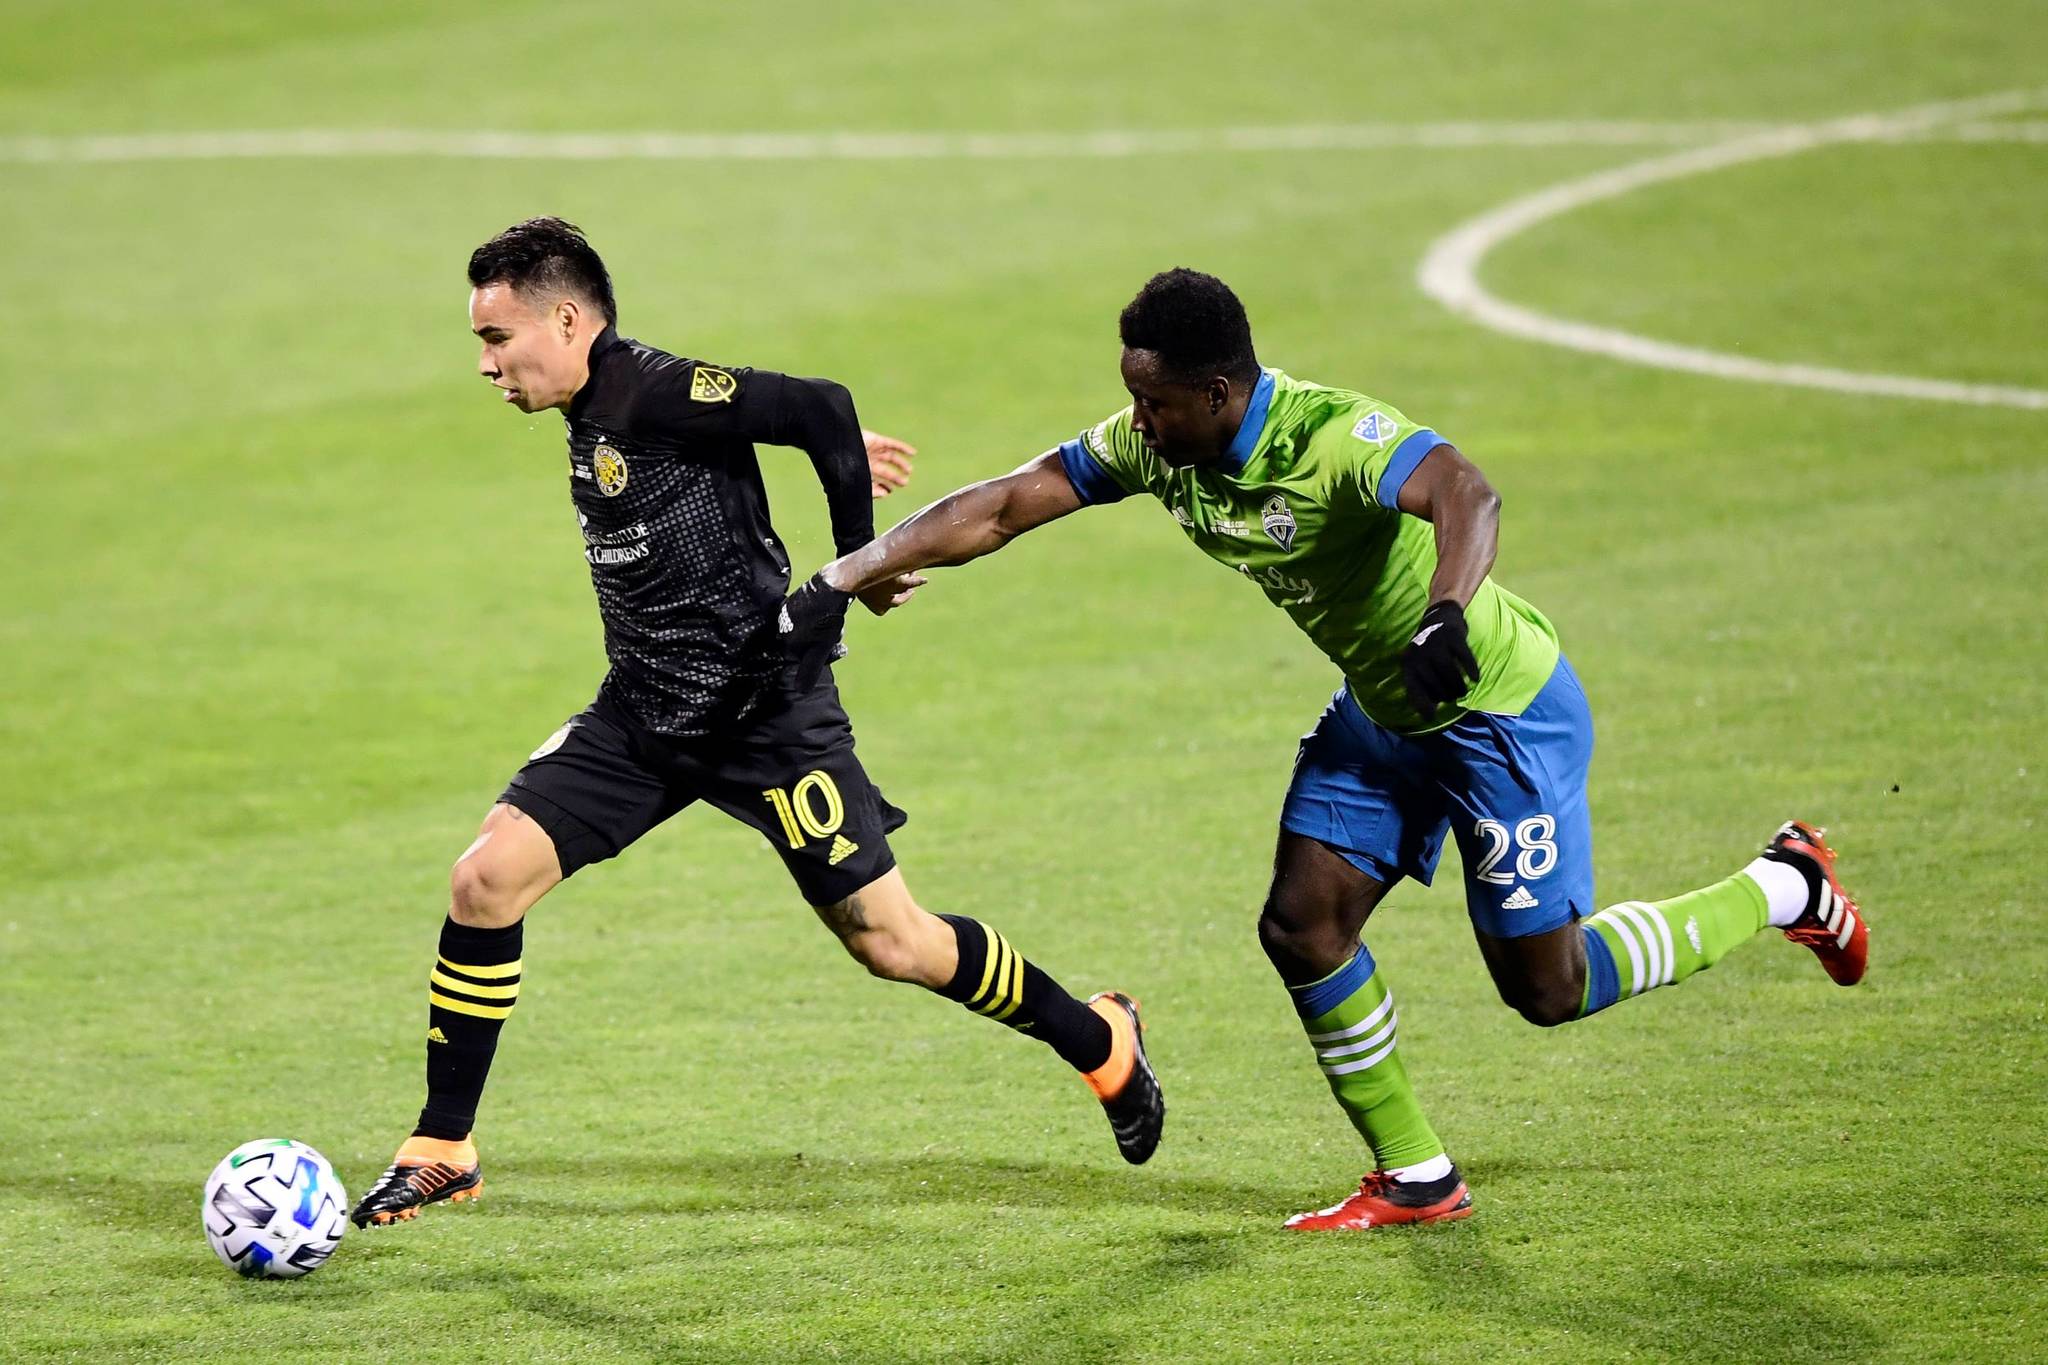 Emilee Chinn/Getty Images 
Lucas Zelarayan, left, of the Columbus Crew controls the ball against Yeimar Gomez of the Seattle Sounders in the first half during the MLS Cup Final at MAPFRE Stadium on Saturday in Columbus, Ohio. The Crew one the game, 3-0.